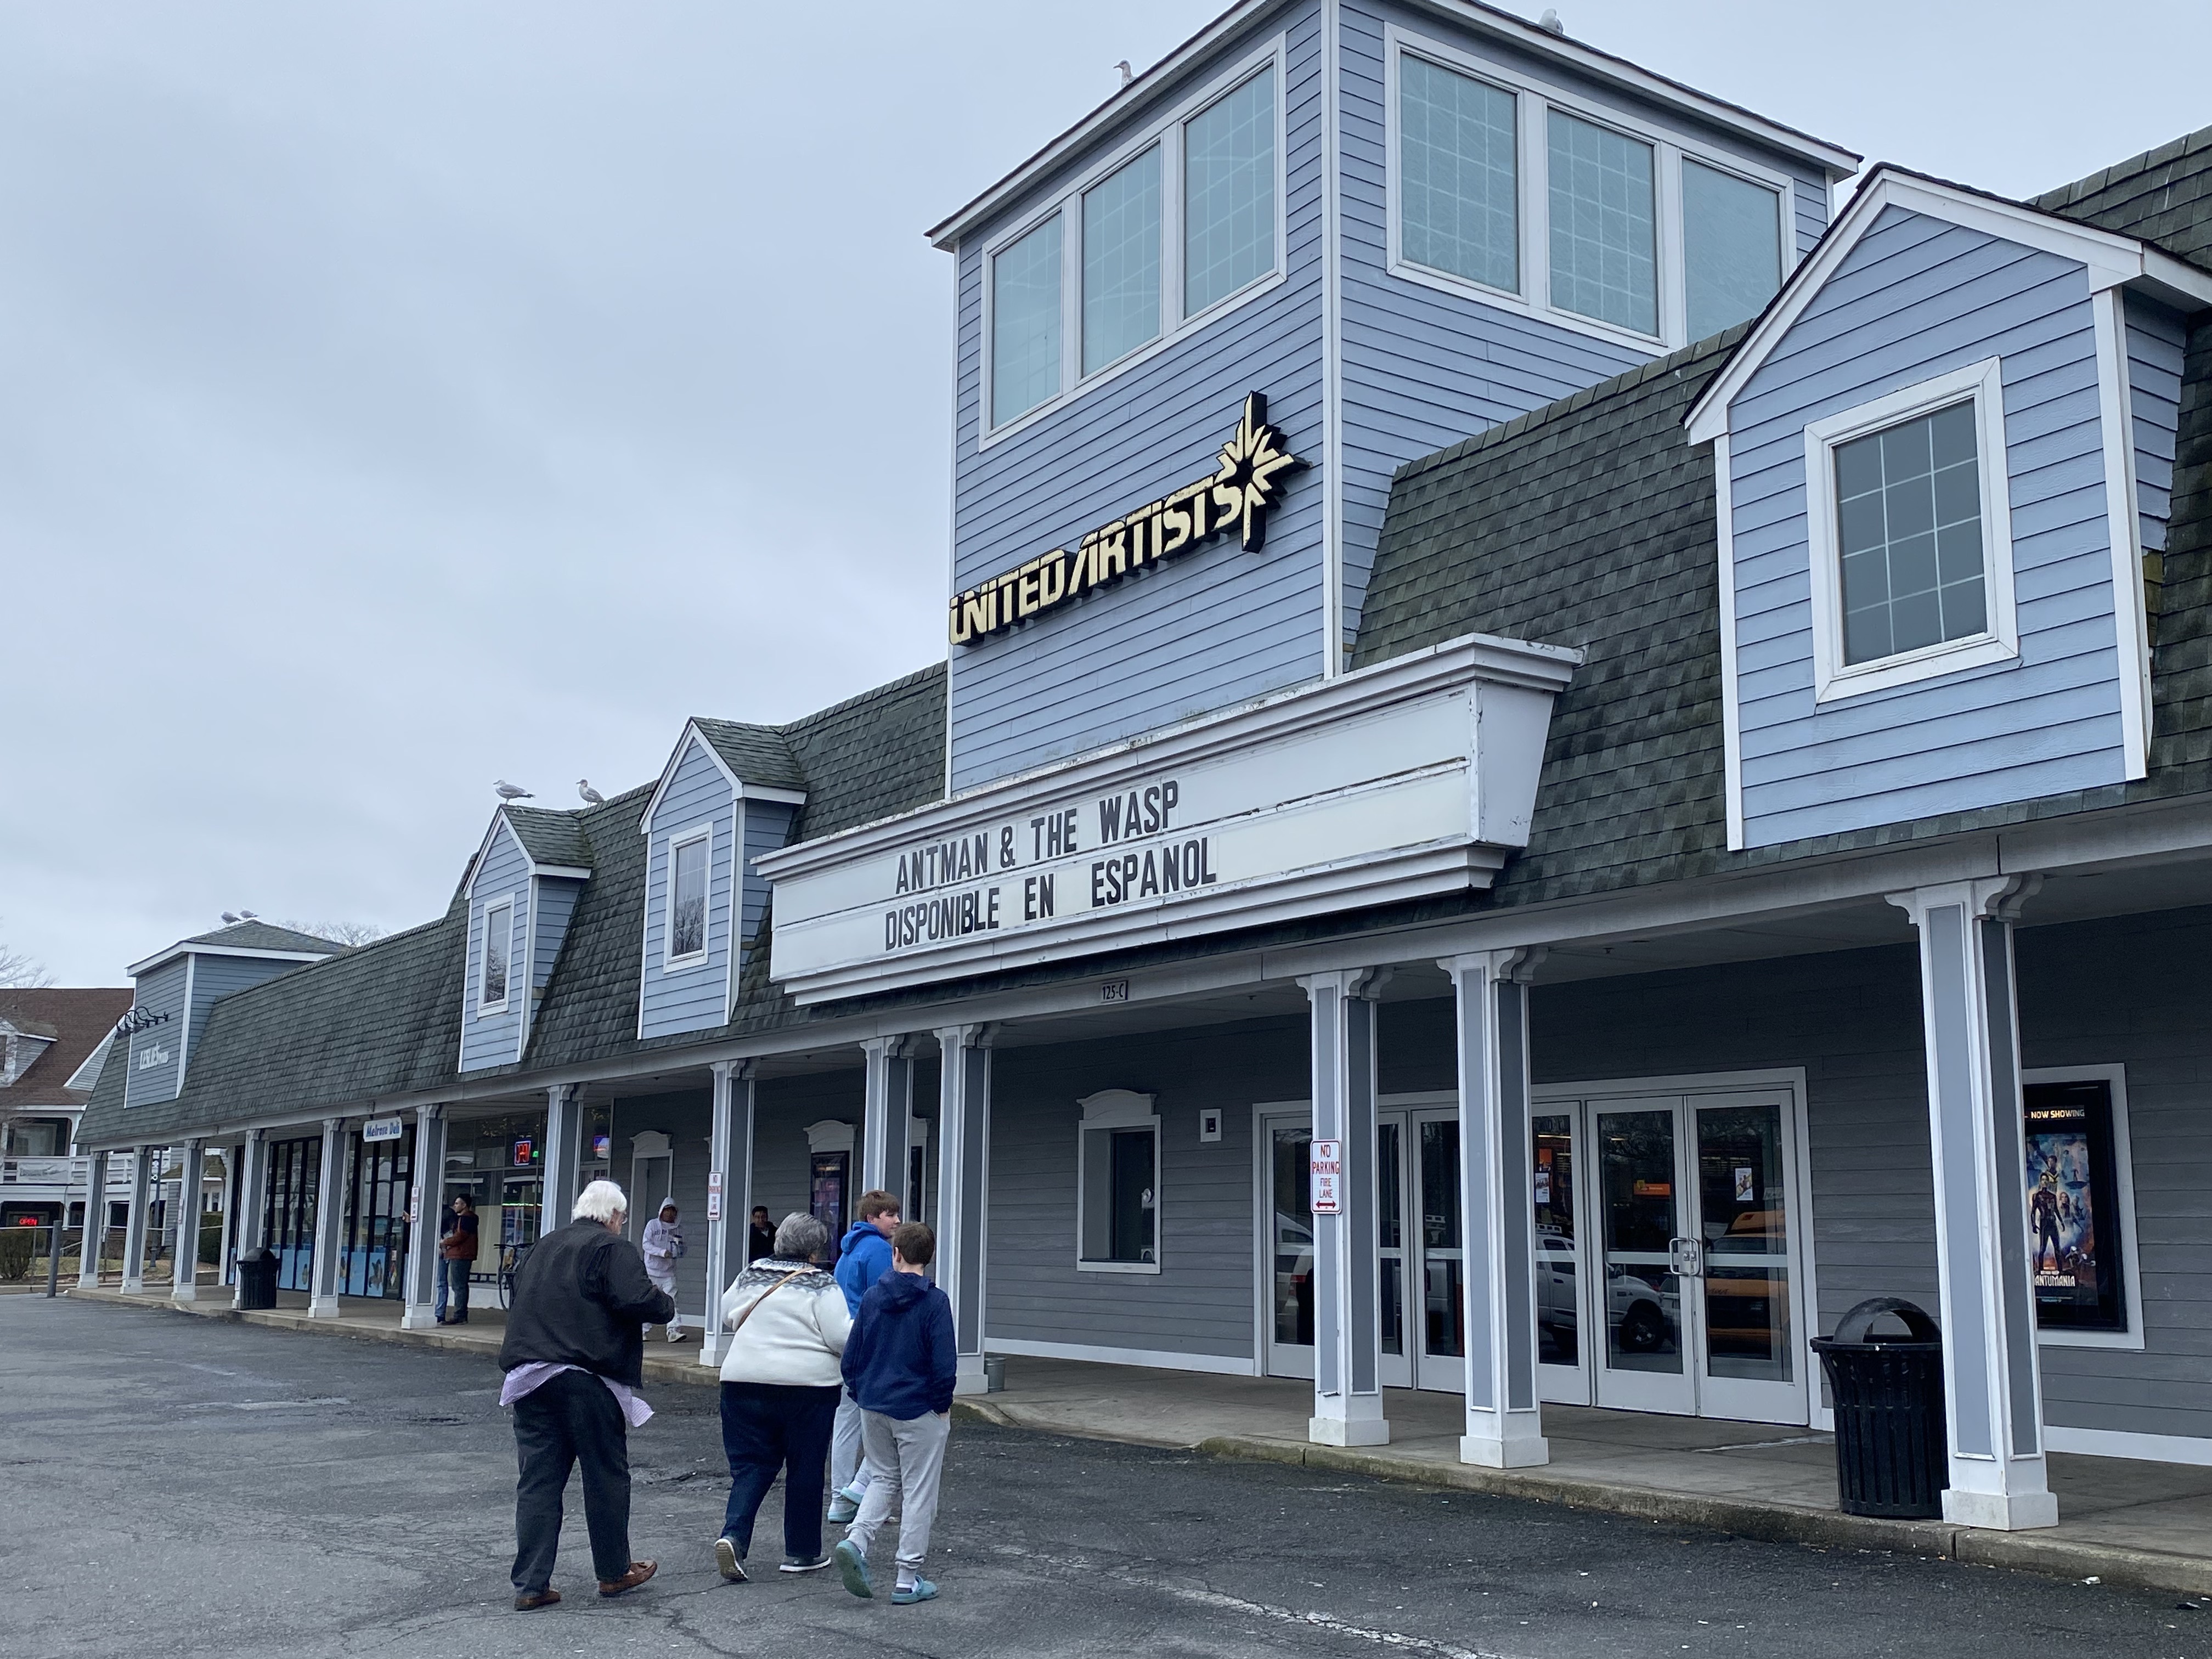 The Regal UA Hampton Bays is open month-to-month while the Southampton Town Planning Board reviews a new use for the building - a CVS. Peter Boody photo